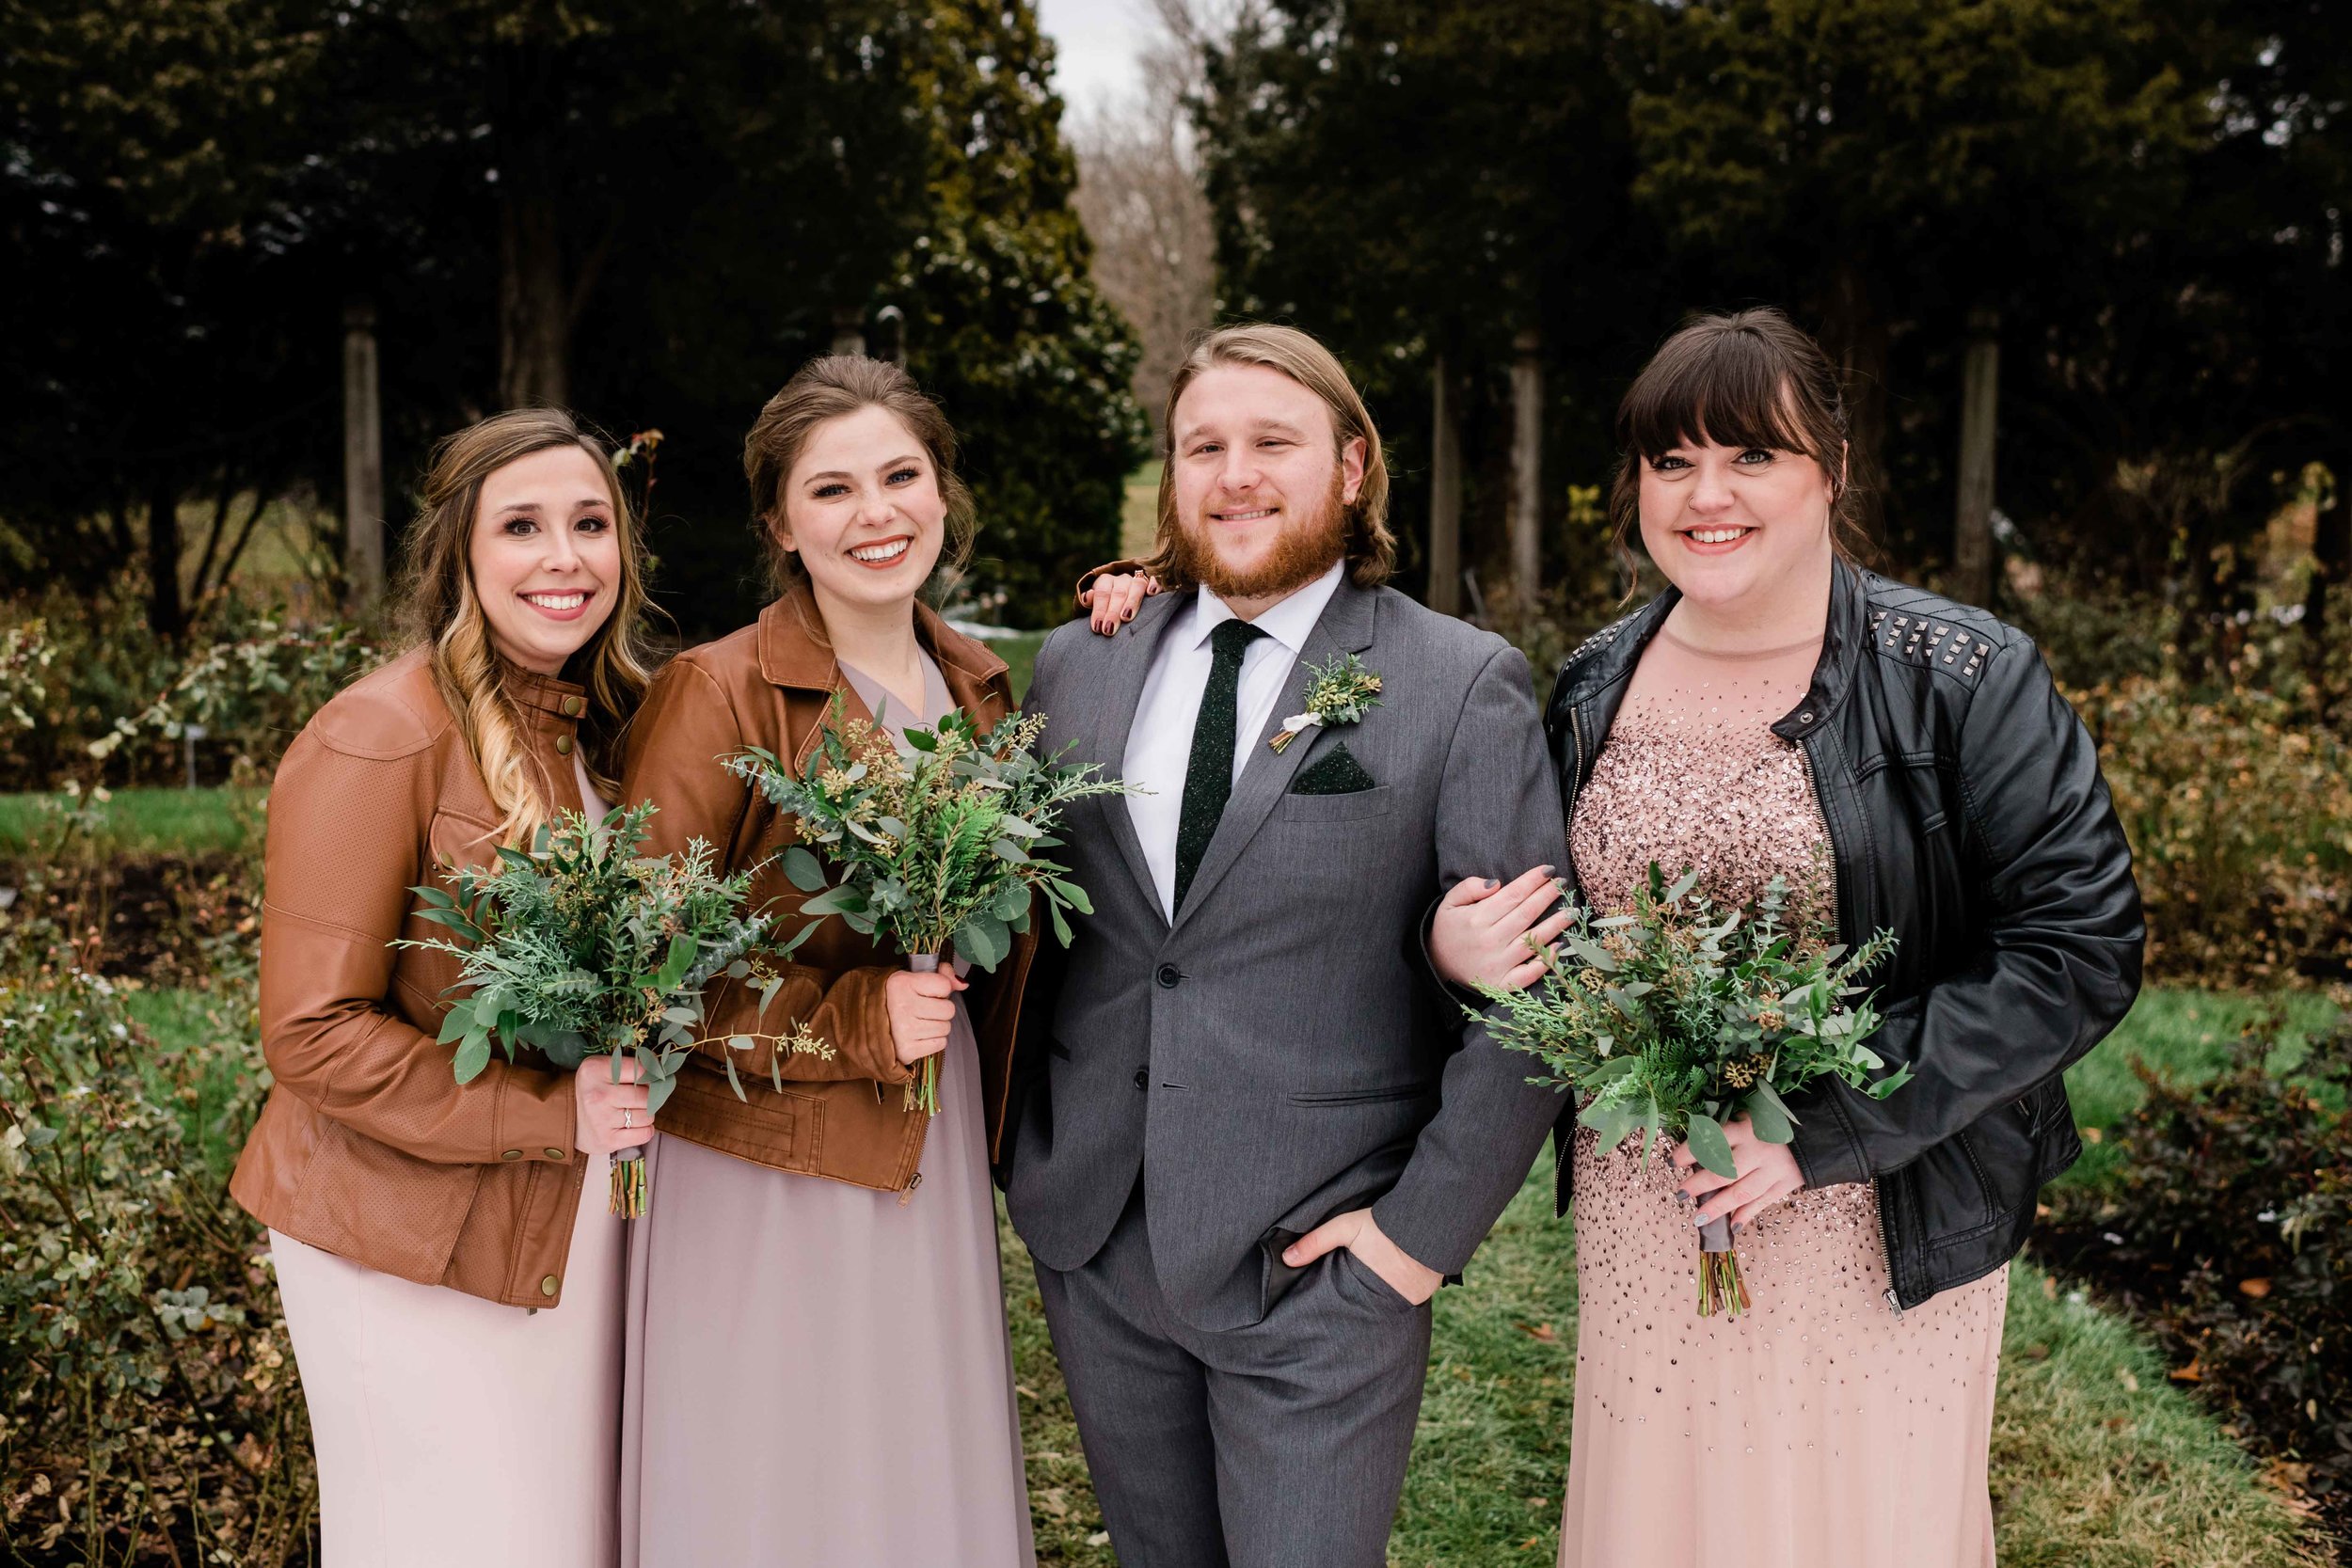 Groom poses with bridesmaids